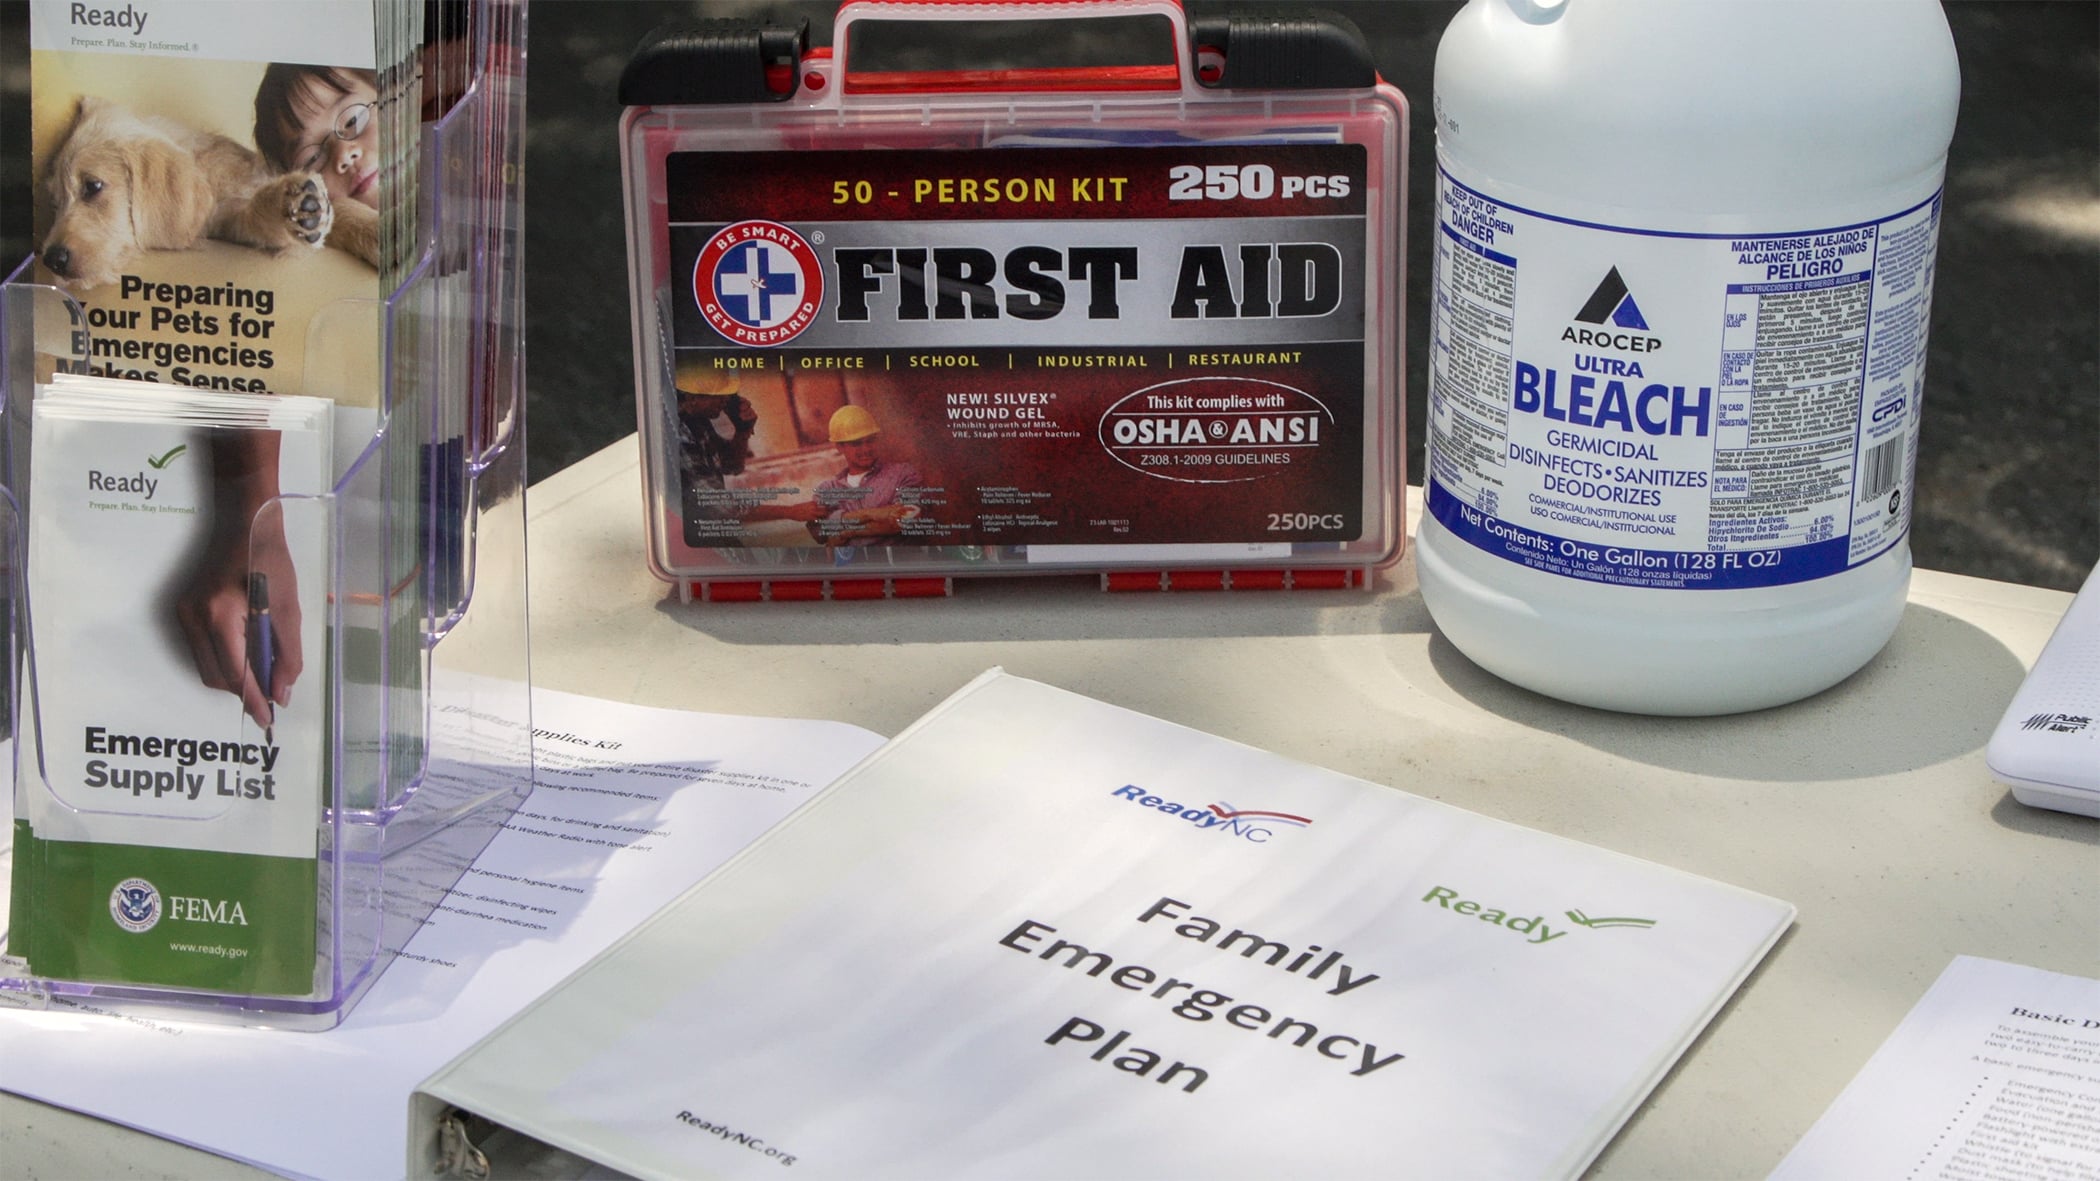 Some items and planning tools for an emergency kit.